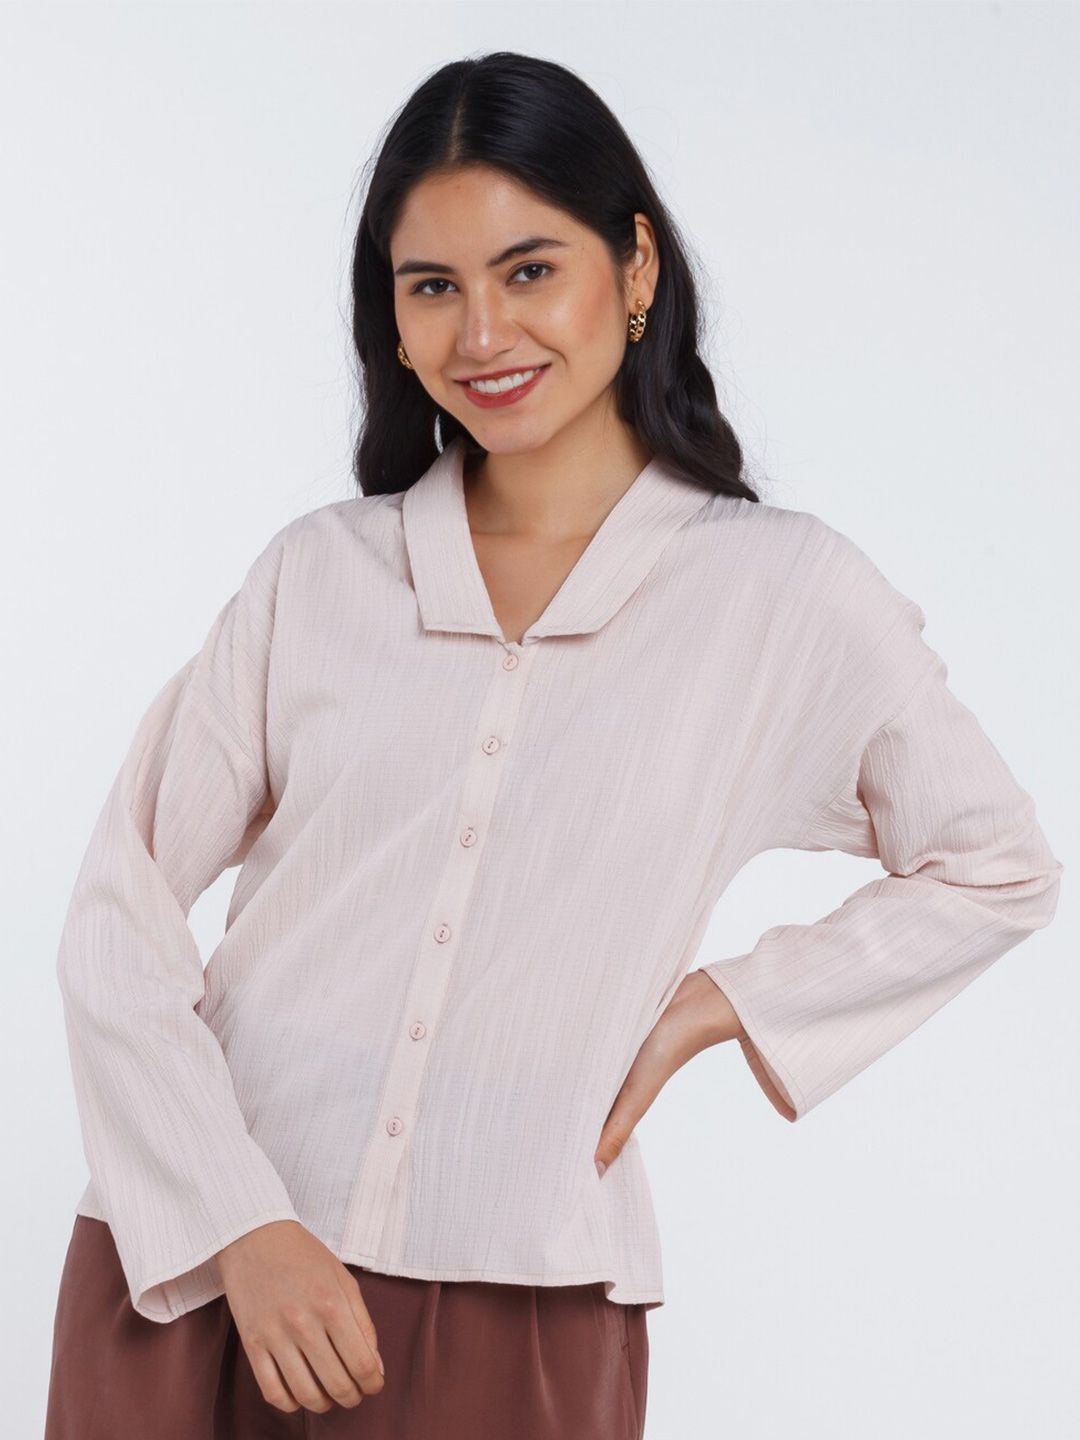 Zink London Pink Shirt Style Top Price in India